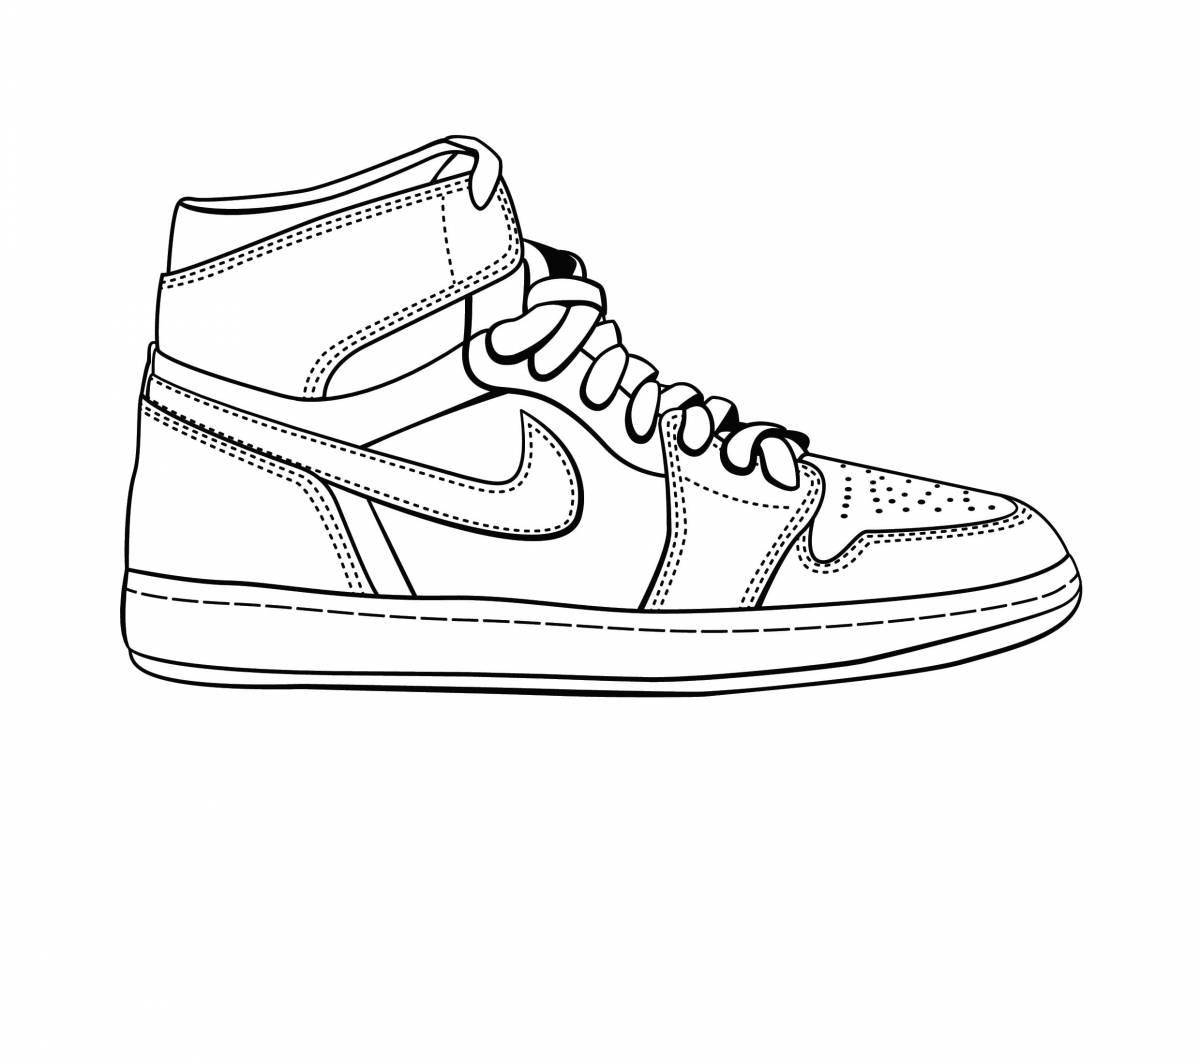 Nike style coloring book